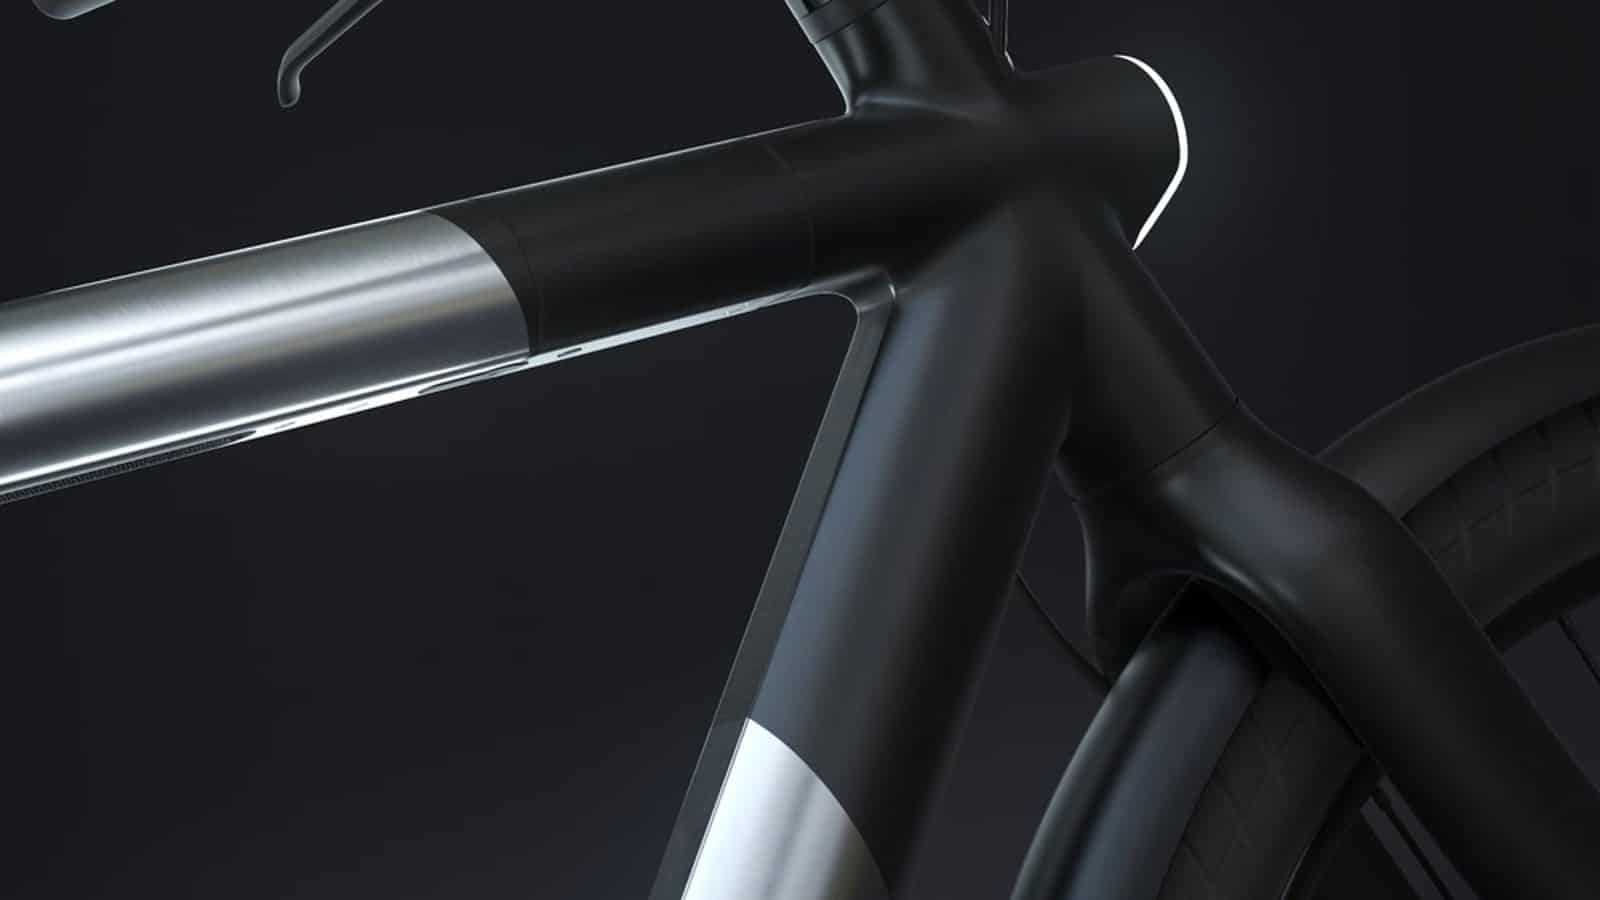 VanMoof drops limited-edition e-bike, the S3 Aluminum